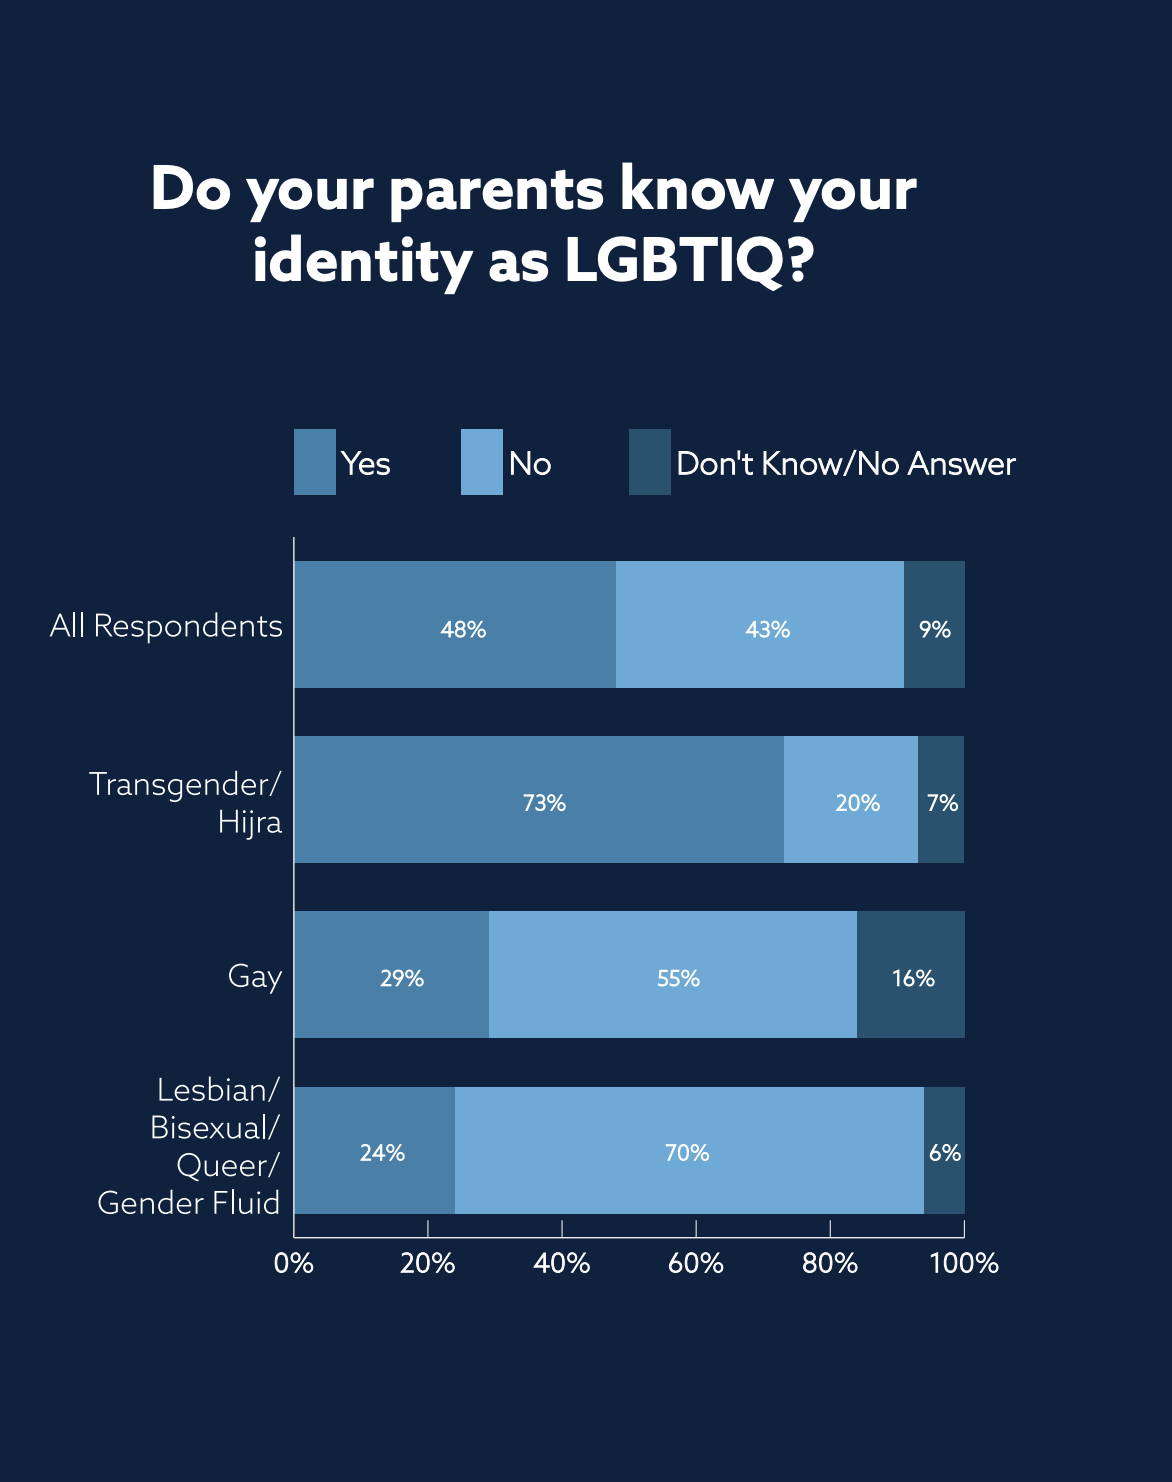 Do your parents know your identity as LGBTIQ? A bar chart.  All respondents: 48% yes; 43% no; 9% don't know/no answer.  Also breaks the numbers down by transgender/hijra, gay, and lesbian/bisexual/queer/gender-fluid.